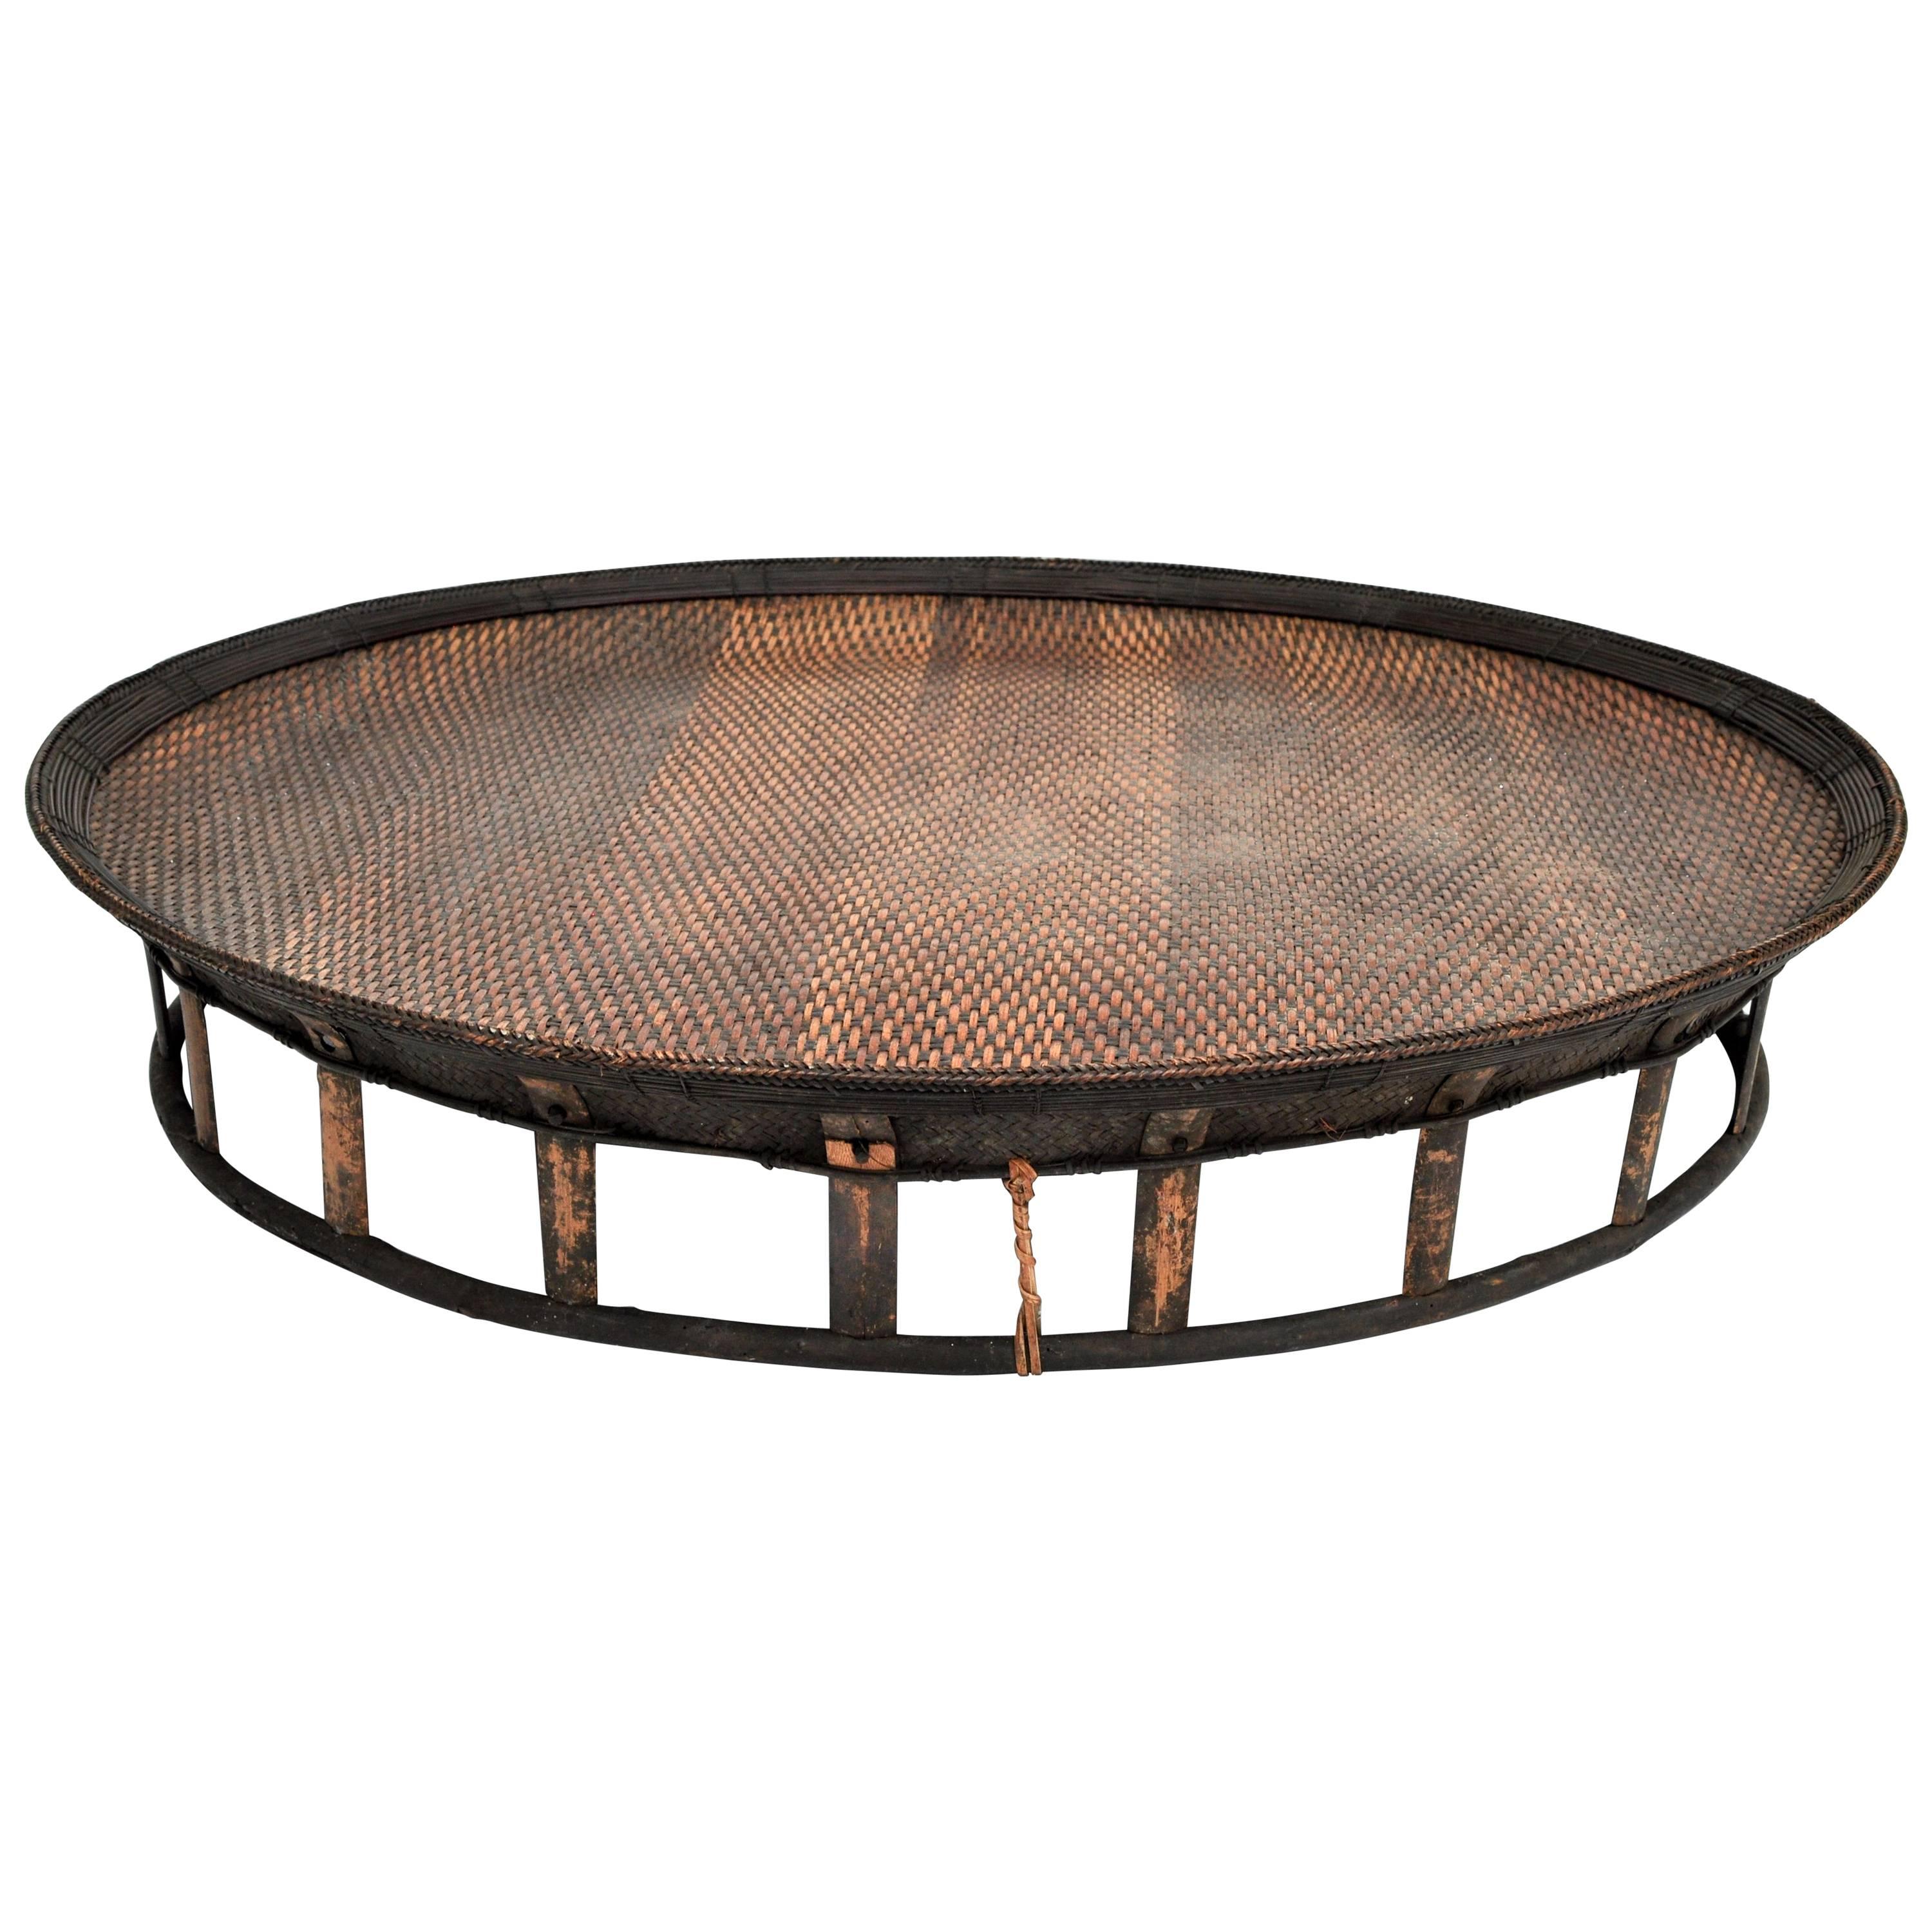 Large Bamboo and Rattan Basket Table or Tray, Laos, Mid-Late 20th Century